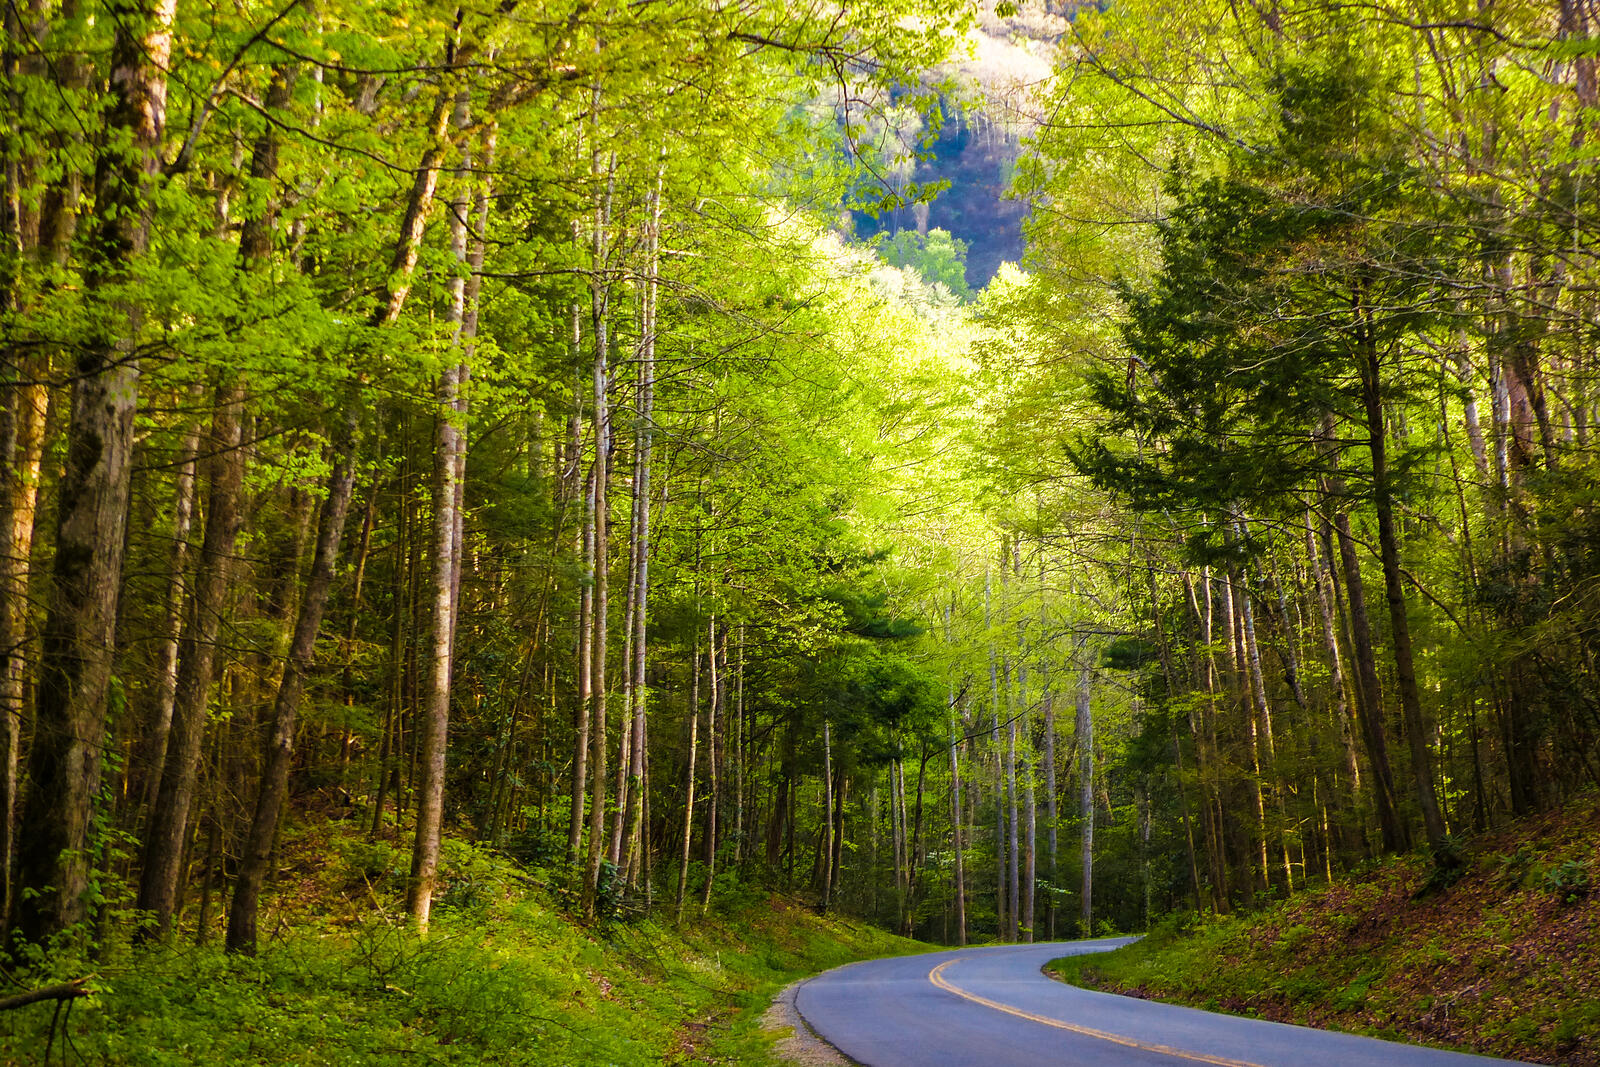 Wallpapers Great Smoky Mountains National Park nature landscape on the desktop